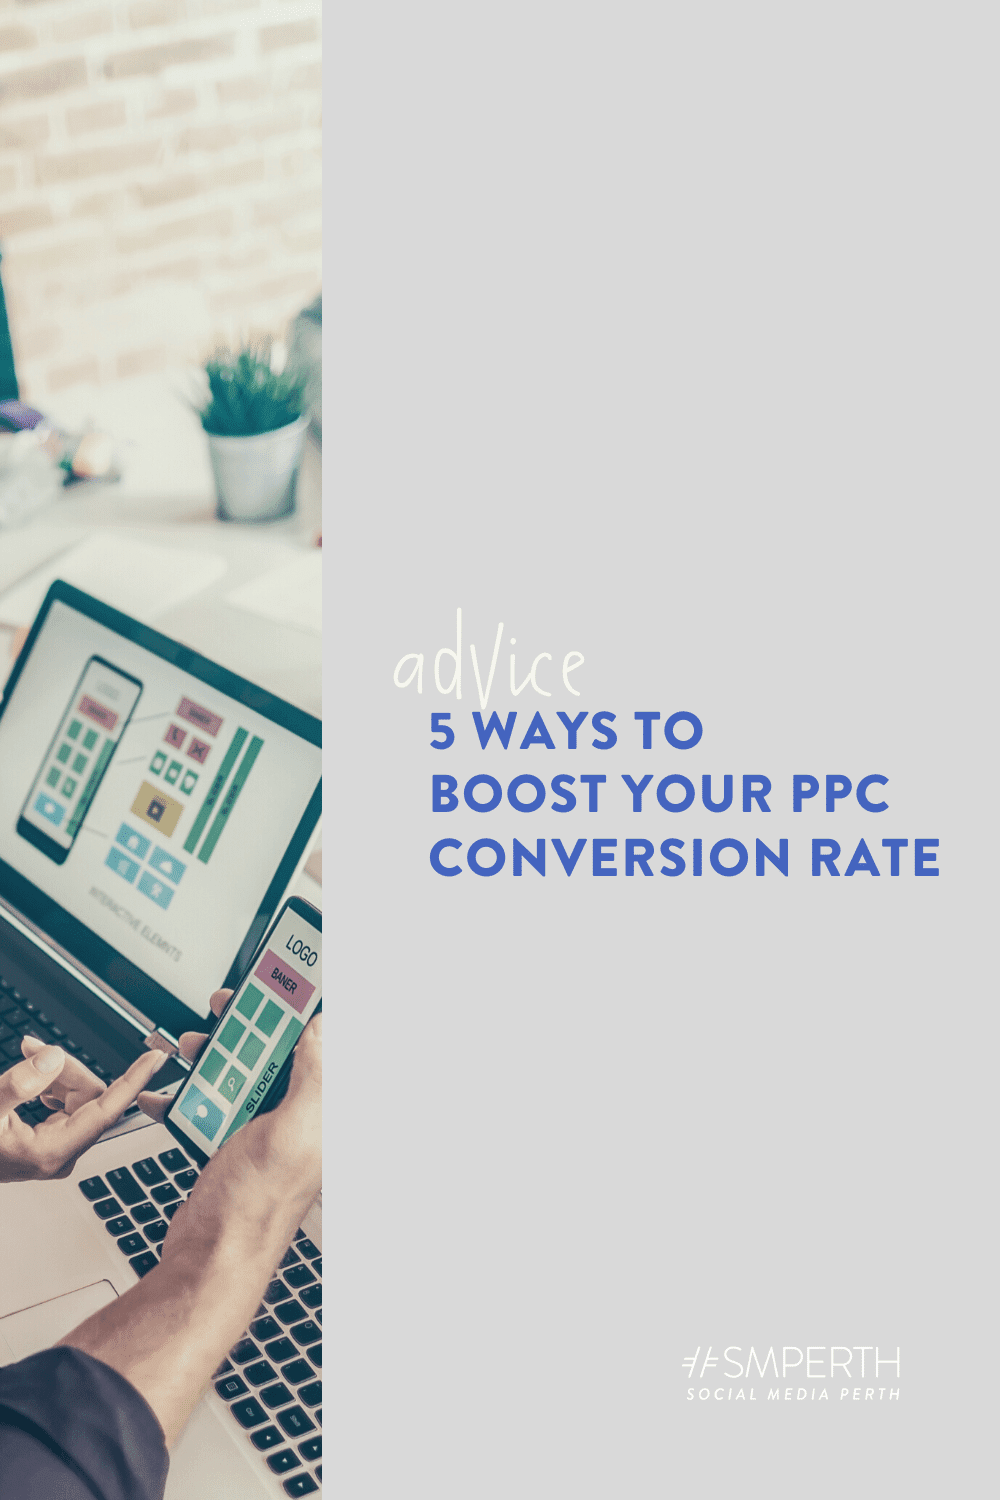 5 Ways to Boost Your PPC Conversion Rate